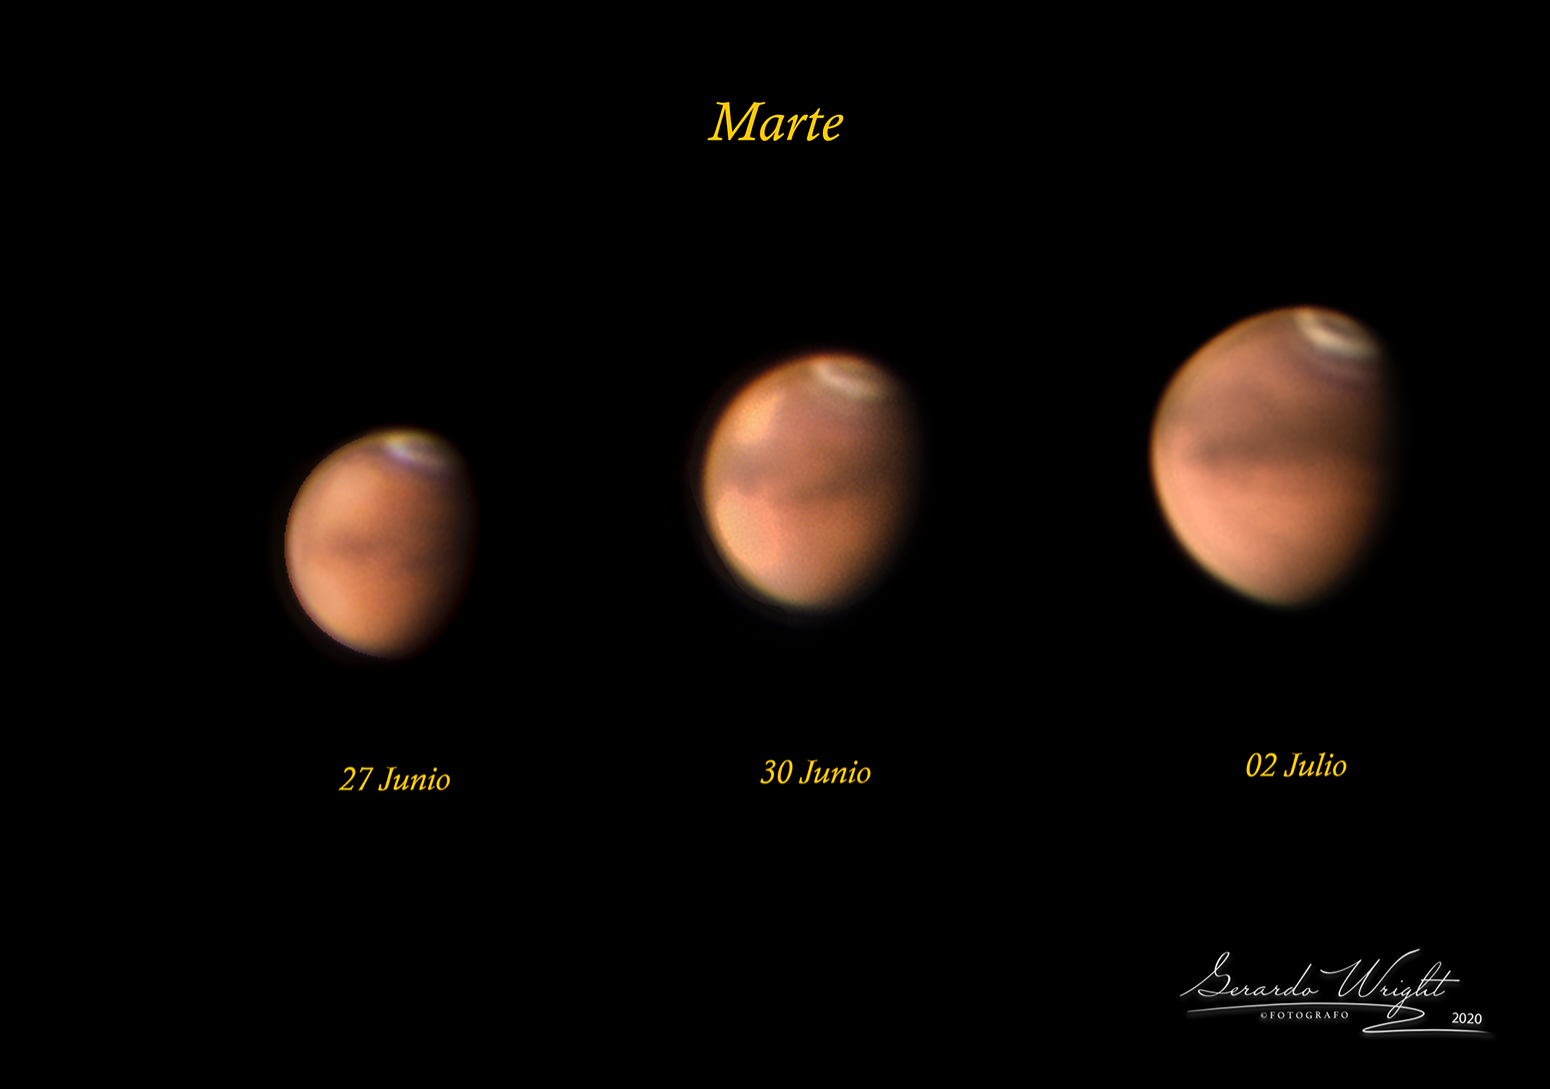 Three telescopic views of the red planet Mars, showing a mottled red surface and a north polar cap.